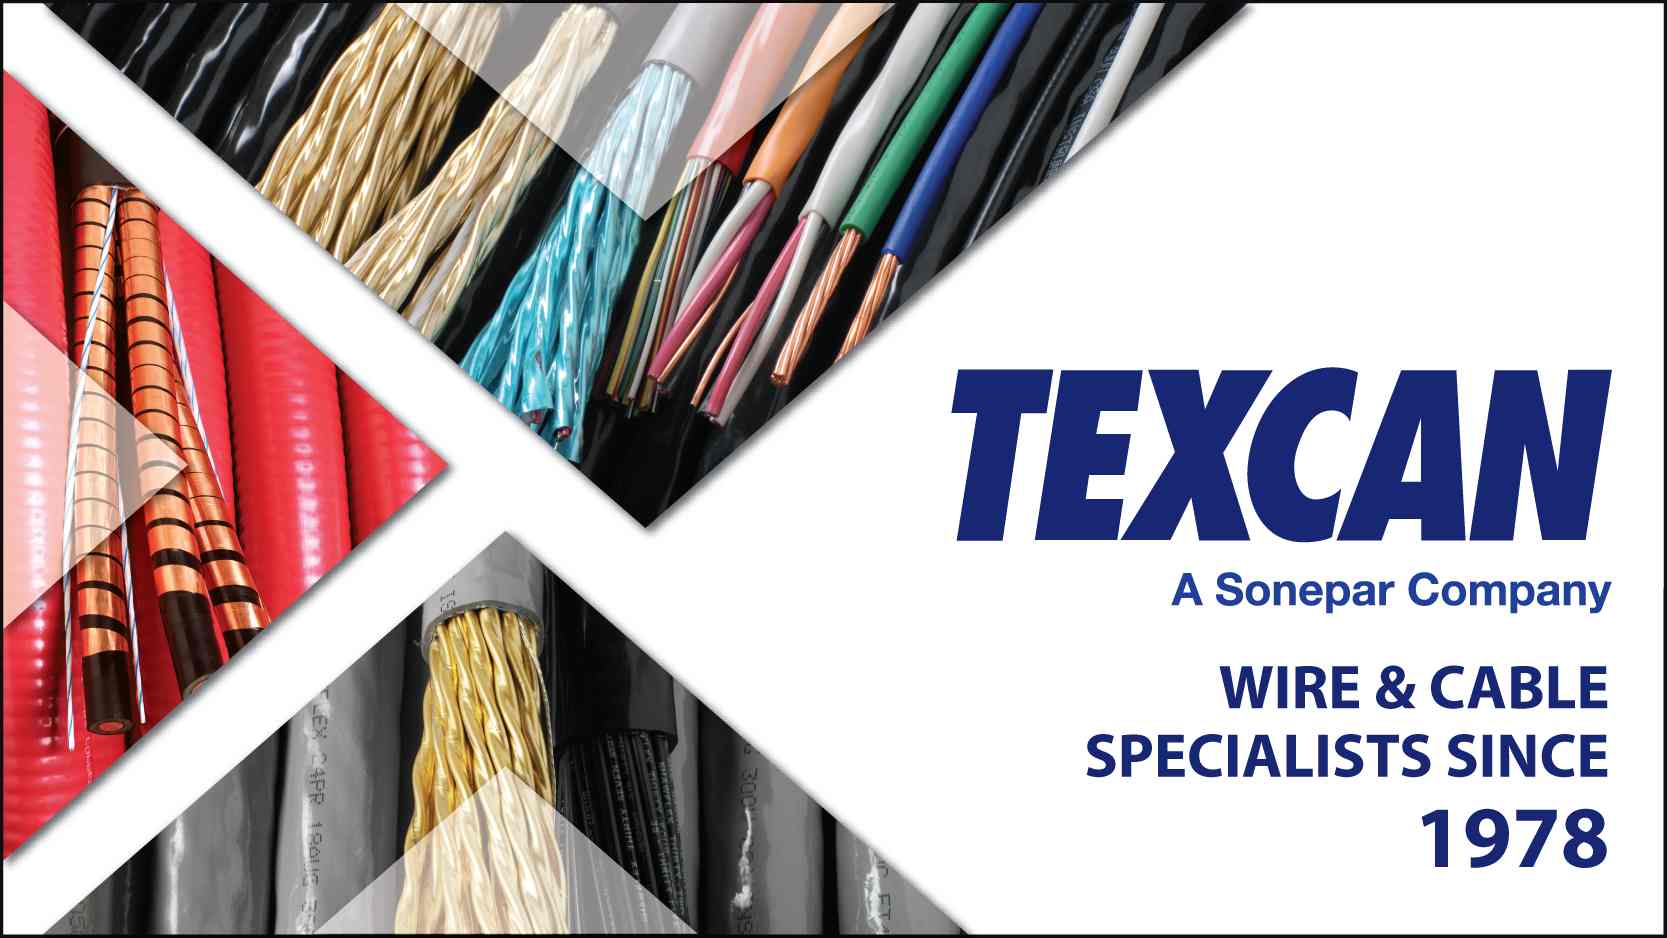 Texcan - About Us (View All) - Corporate Flyer